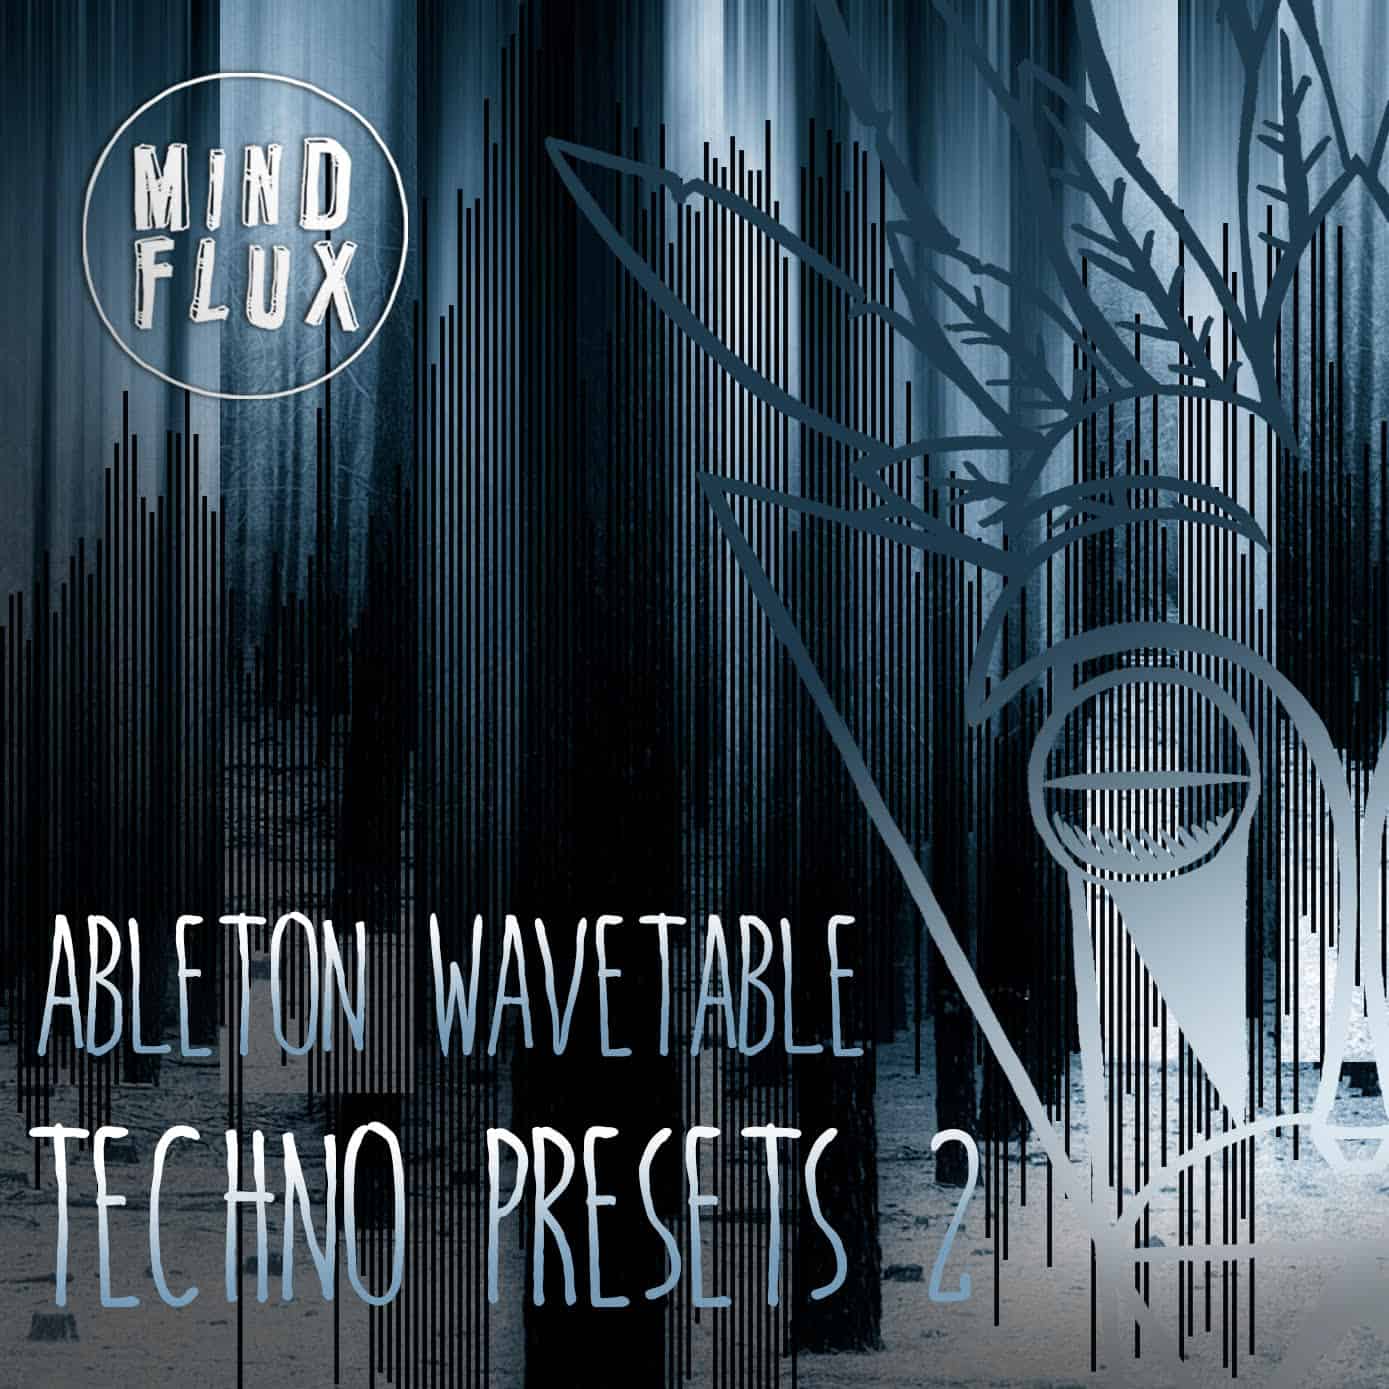 Ableton Wavetable Techno Presets 02 by Mind Flux